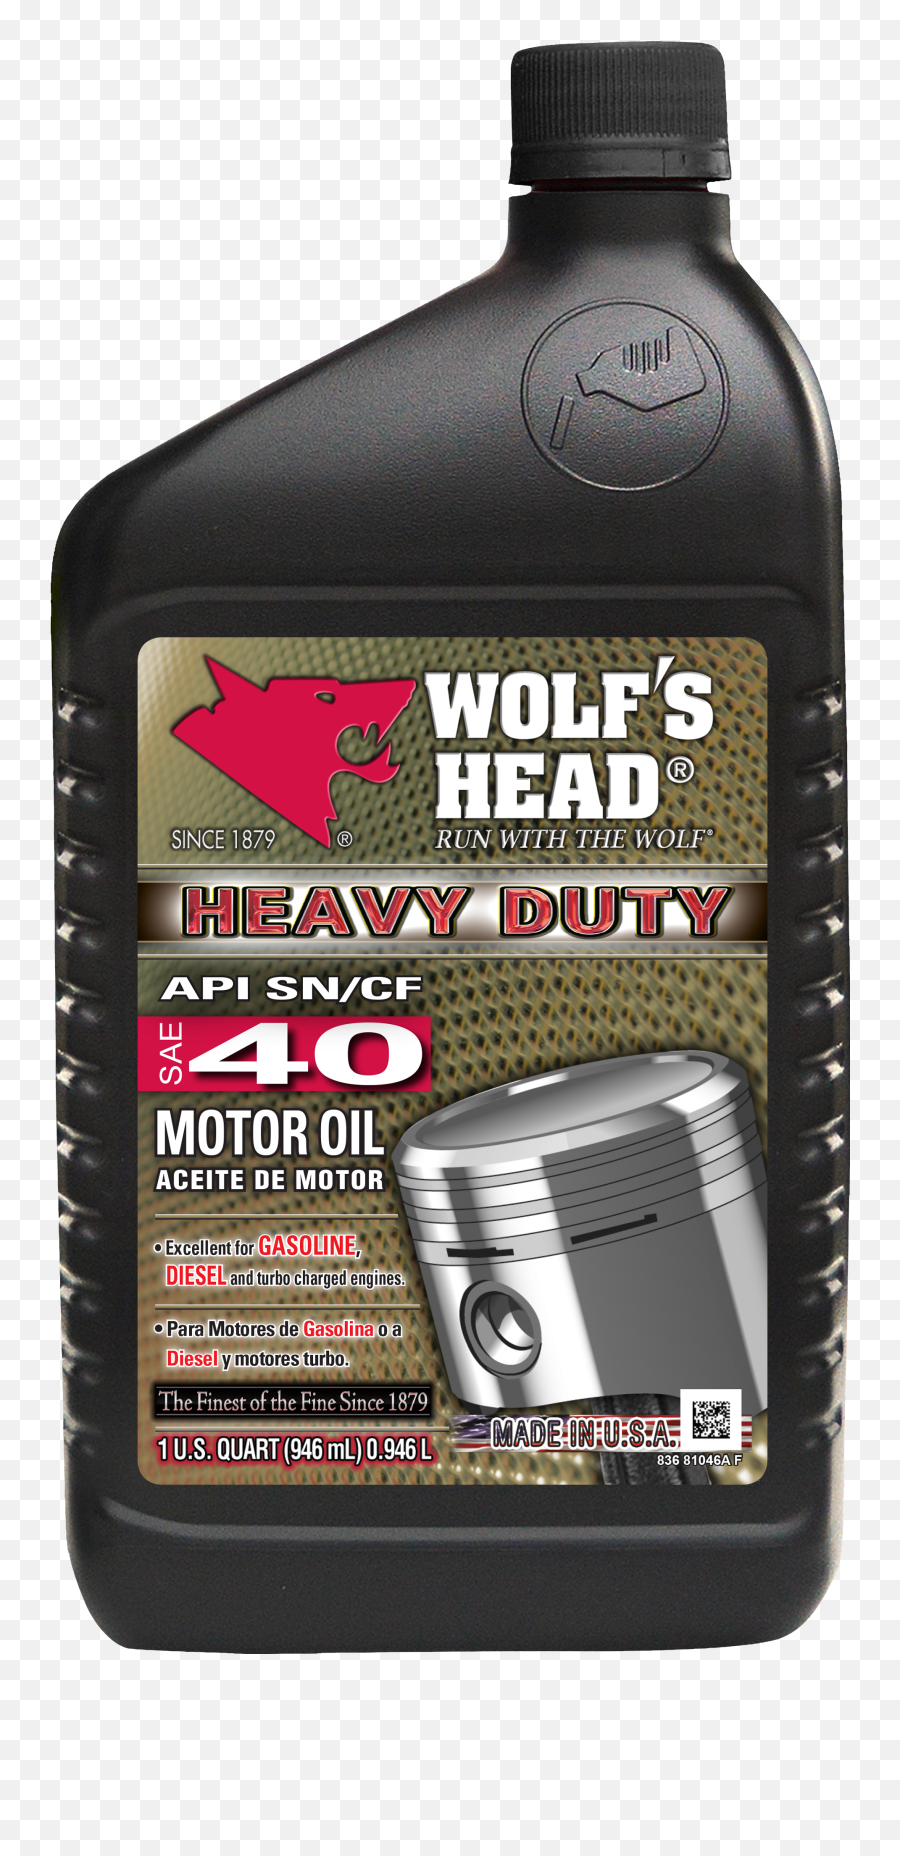 Wolf Head Png - Front Hires Wolfs Head 5w20 459148 Head Sae 30 Oil,Wolf Head Png